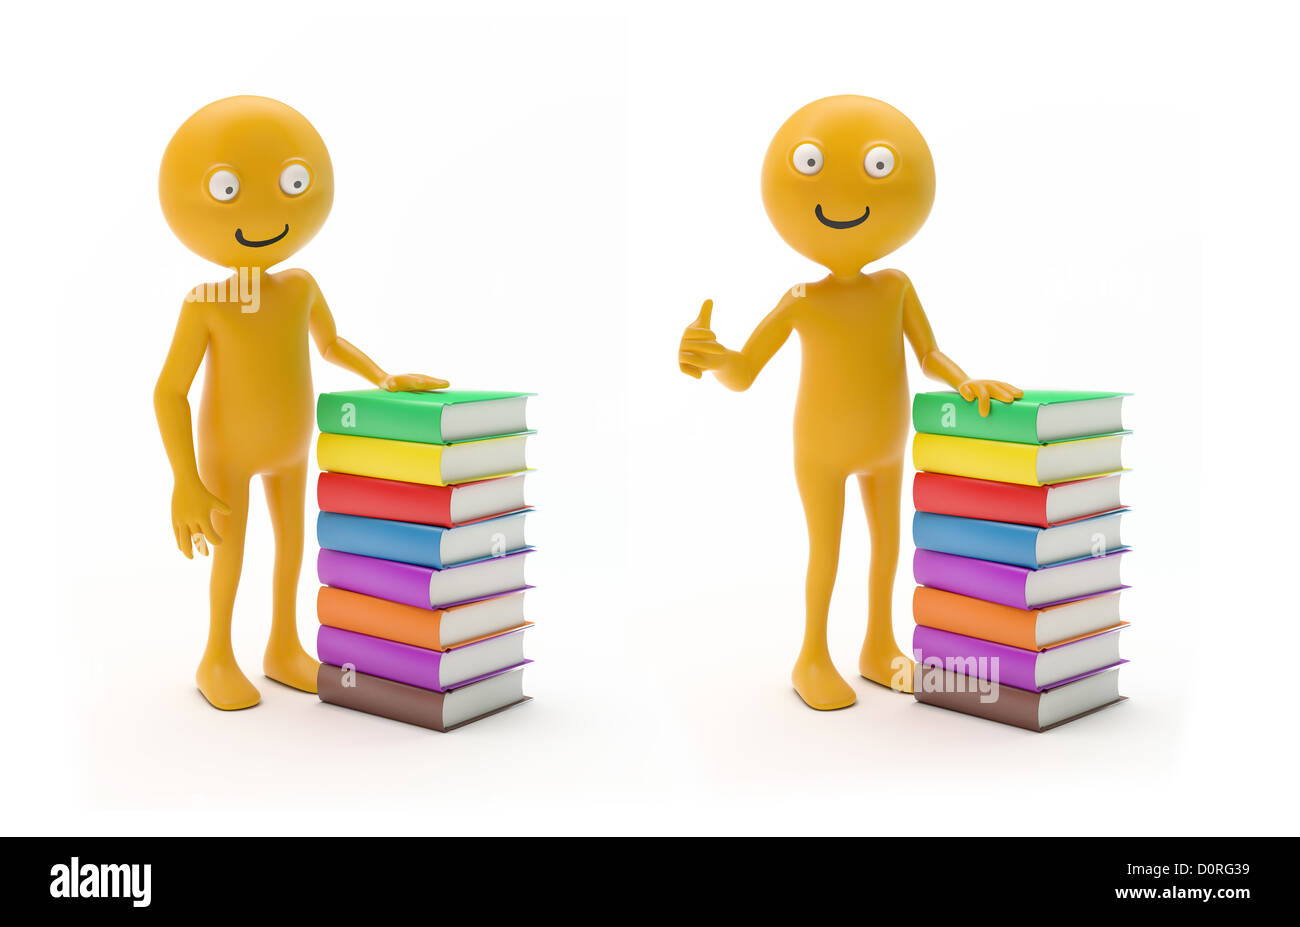 Smiley character with books Stock Photo